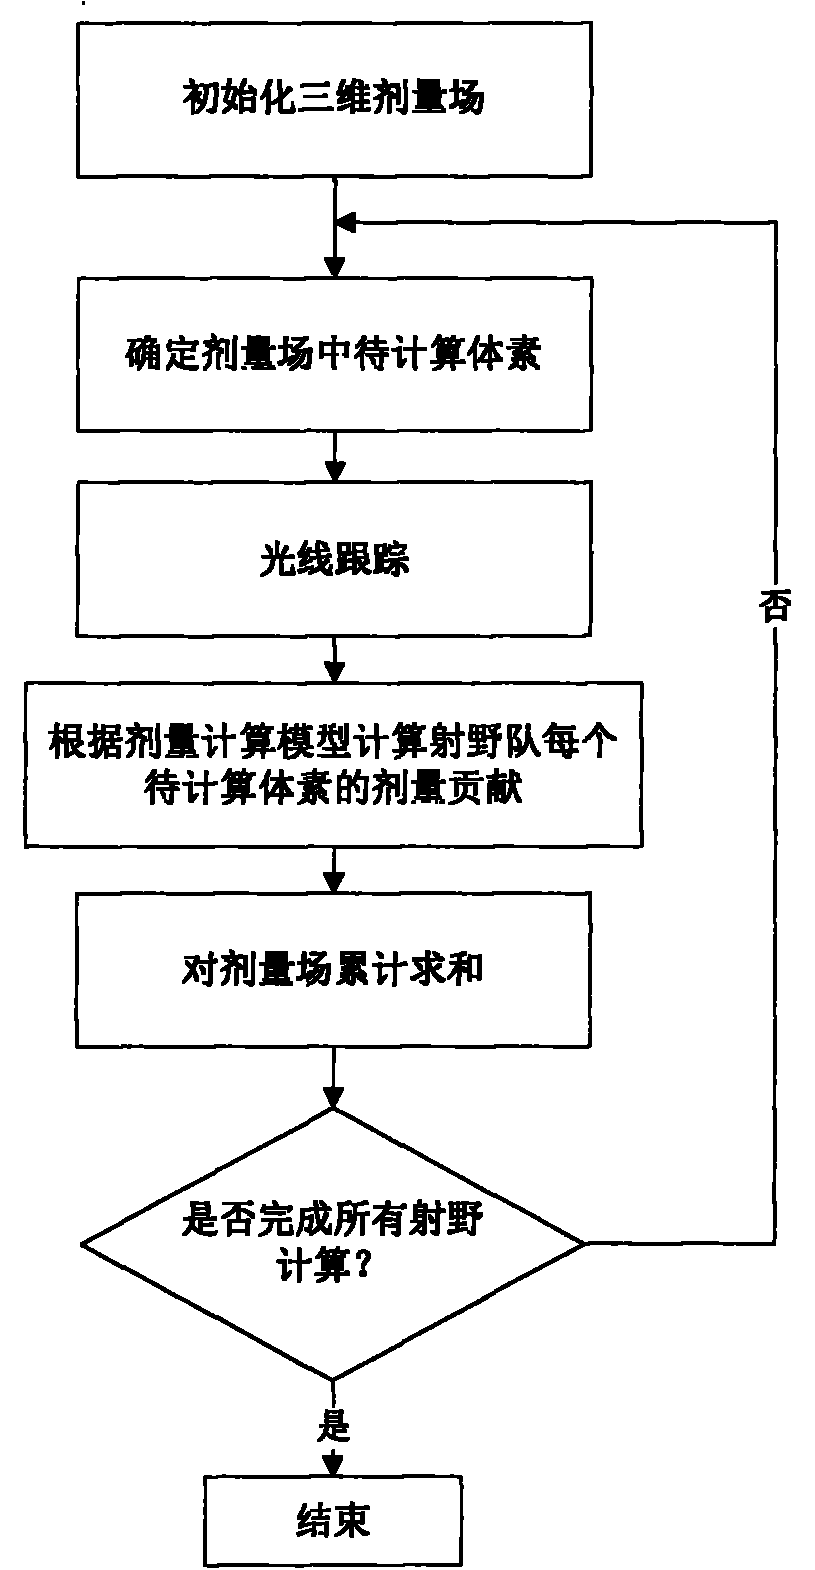 Rapid calculation method of stereotactic radiotherapy dosage field distribution